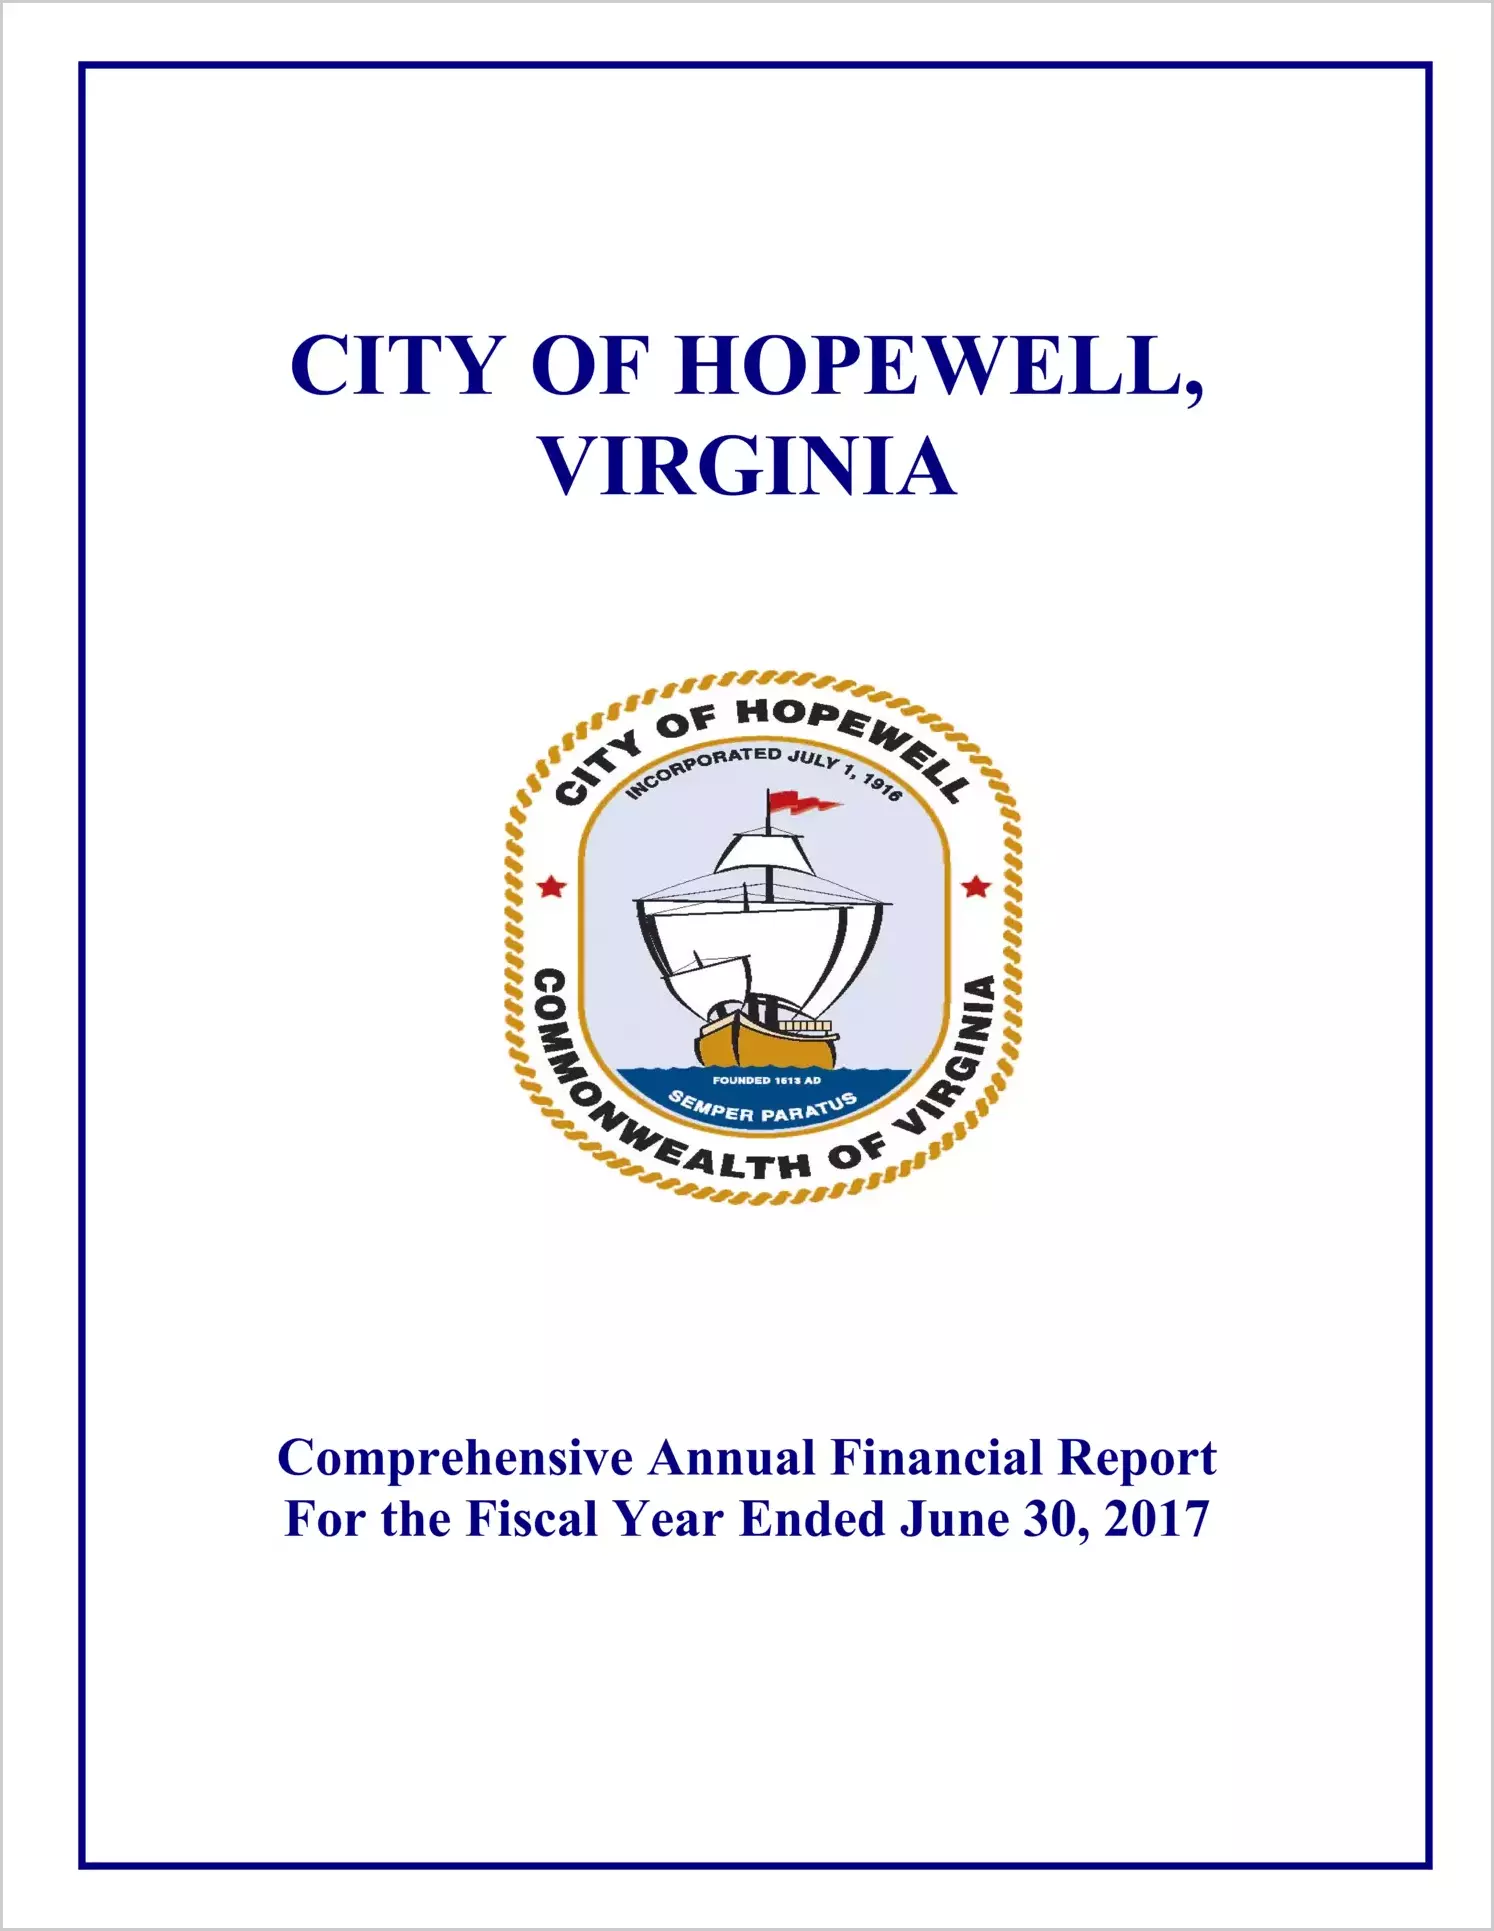 2017 Annual Financial Report for City of Hopewell